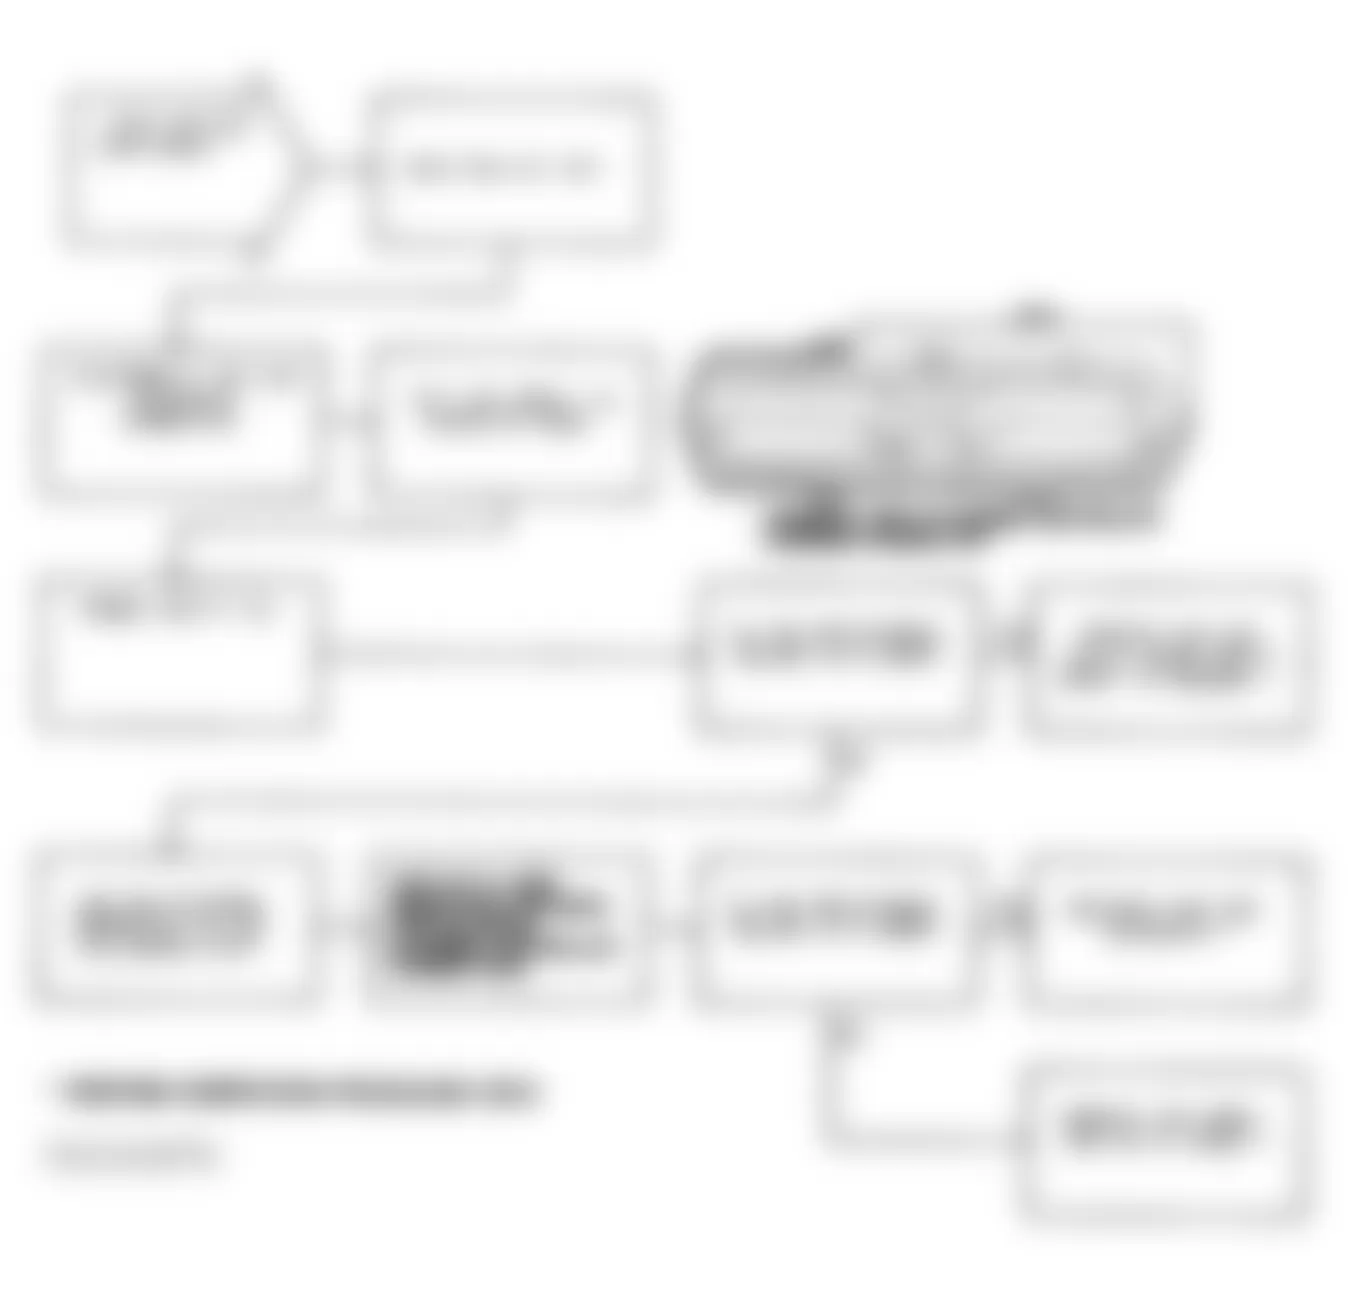 Chrysler Imperial 1991 - Component Locations -  Test DR-22A Code 32: Flowchart (3 of 3)